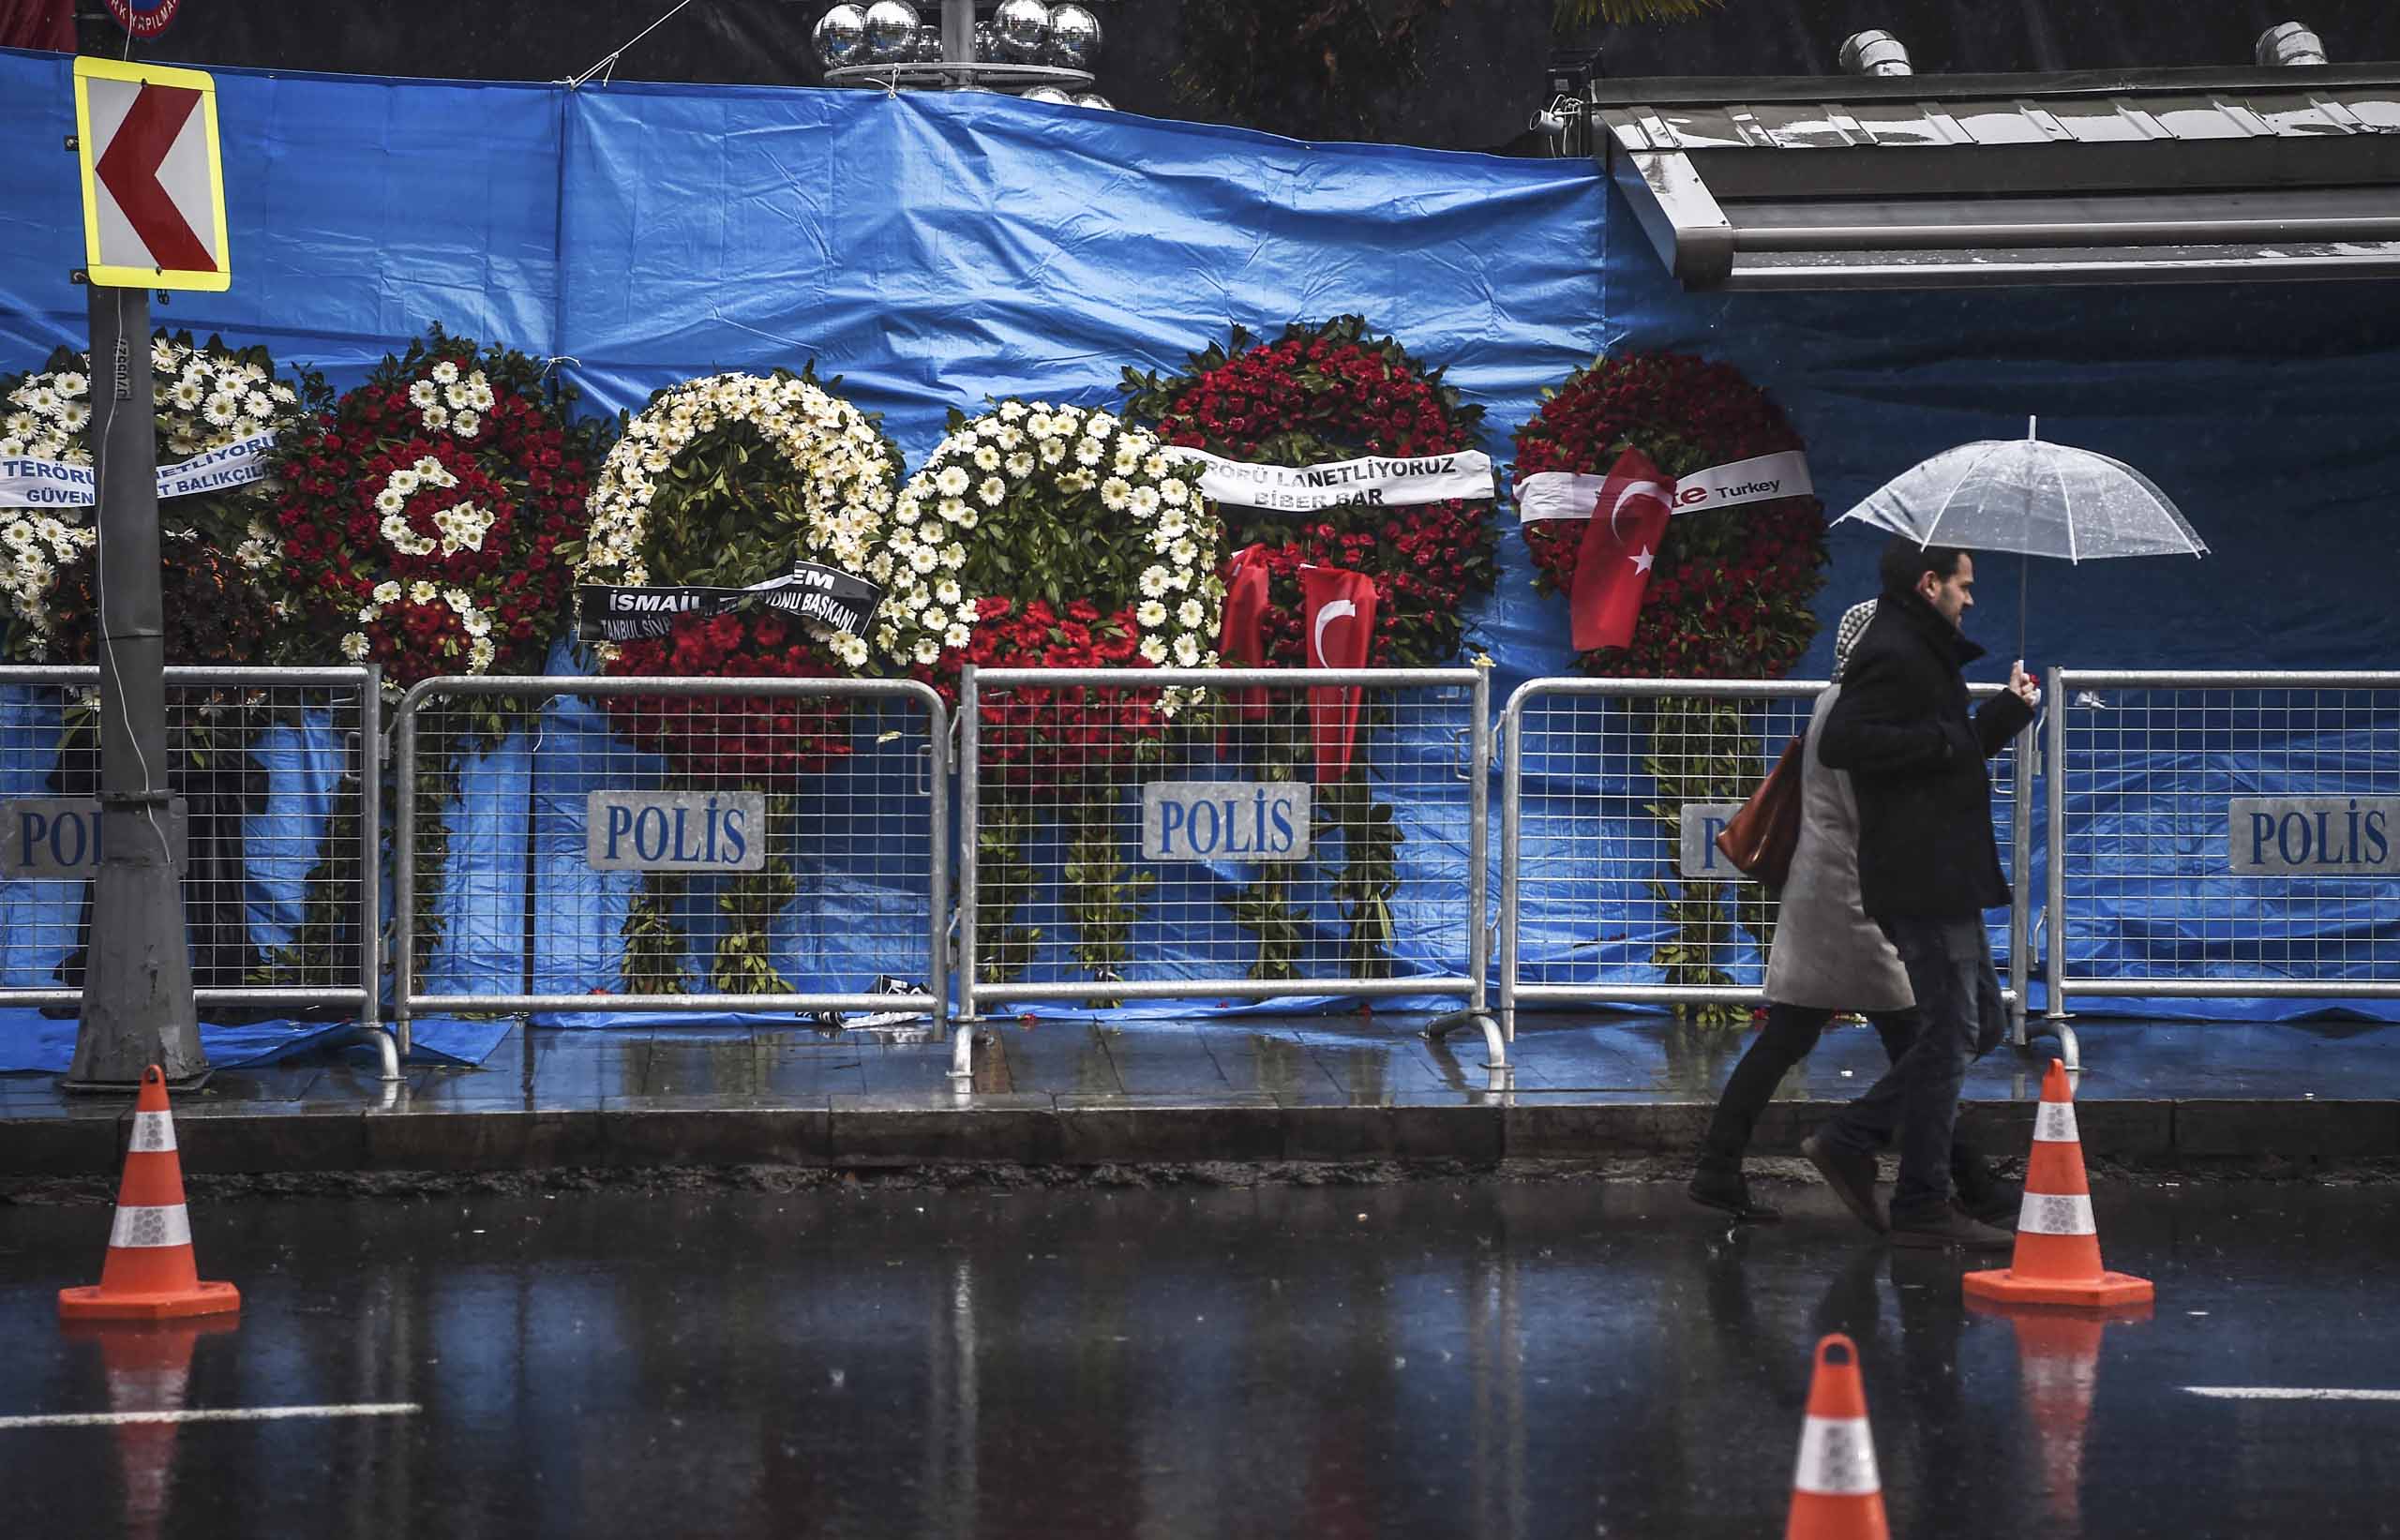 A couple walk past the Reina nightclub on January 5, 2017 in Istanbul, days after a gunman killed 39 people on New Year's night. 
                      The gunman who killed 39 people at an Istanbul nightclub had fought in Syria for Islamic State jihadists, a report said on January 3, as Turkish authorities intensified their hunt for the attacker. Of the 39 dead, 27 were foreigners, mainly from Arab countries, with coffins repatriated overnight to countries including Lebanon and Saudi Arabia. / AFP / OZAN KOSE        (Photo credit should read OZAN KOSE/AFP/Getty Images) (OZAN KOSE—AFP/Getty Images)